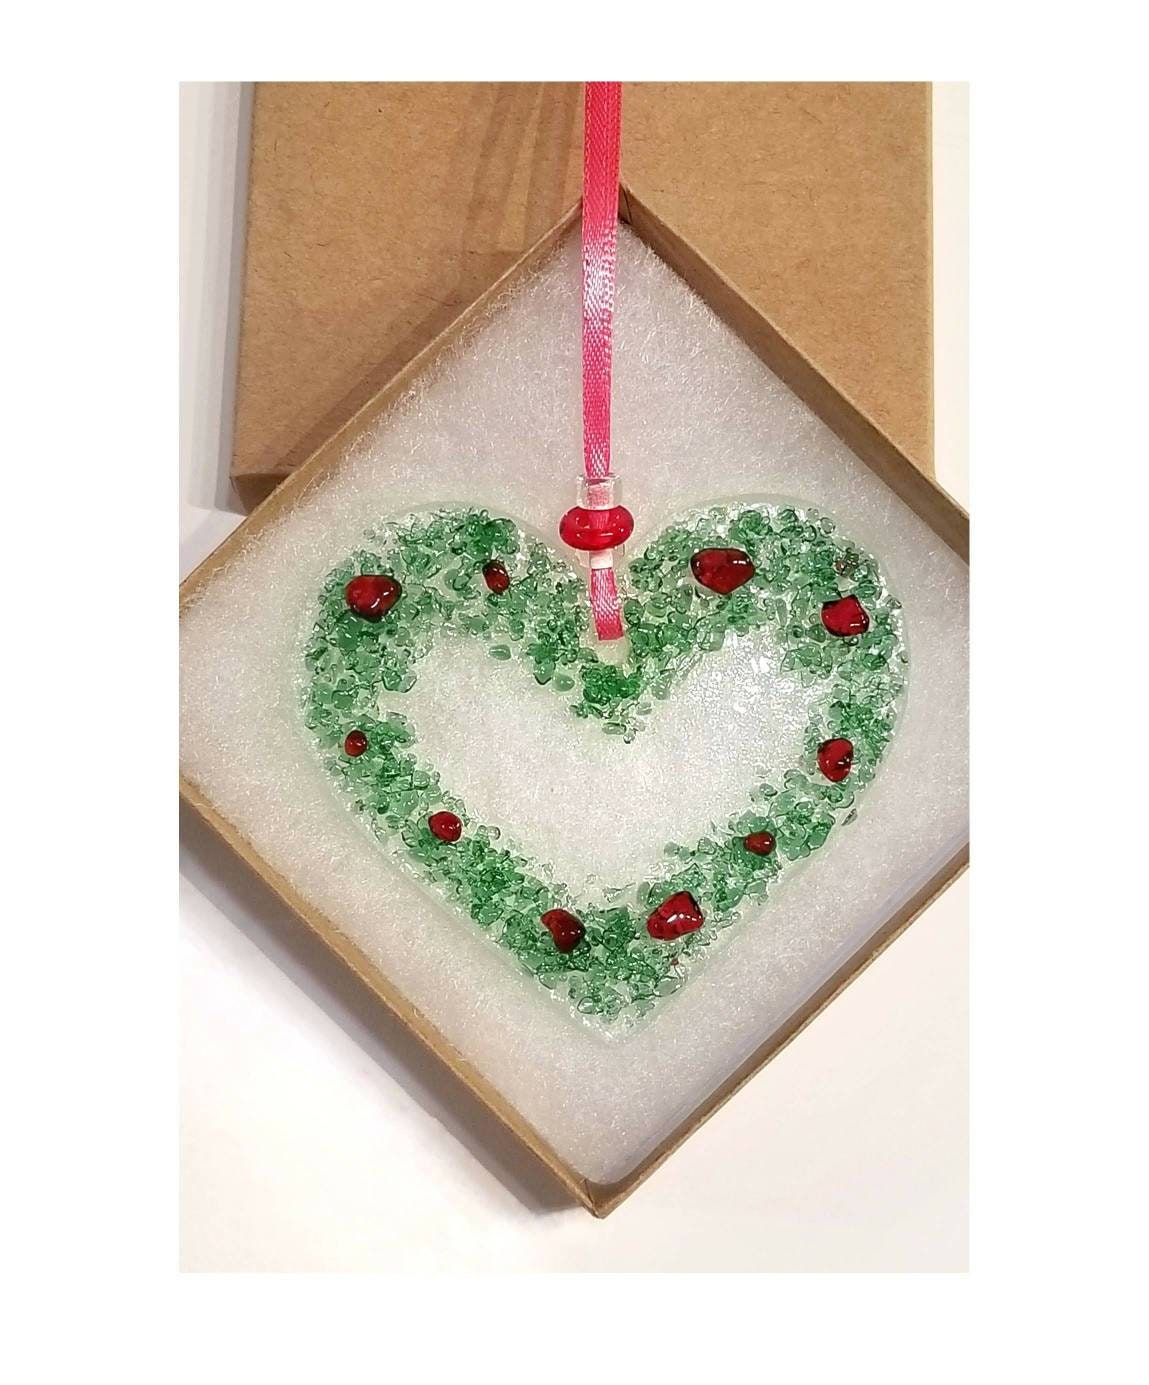 Heart Shaped Wreath. Fused Glass Ornament, Suncatcher. Red & Light Green crushed glasses are kiln fired onto clear glass. Handmade by me.